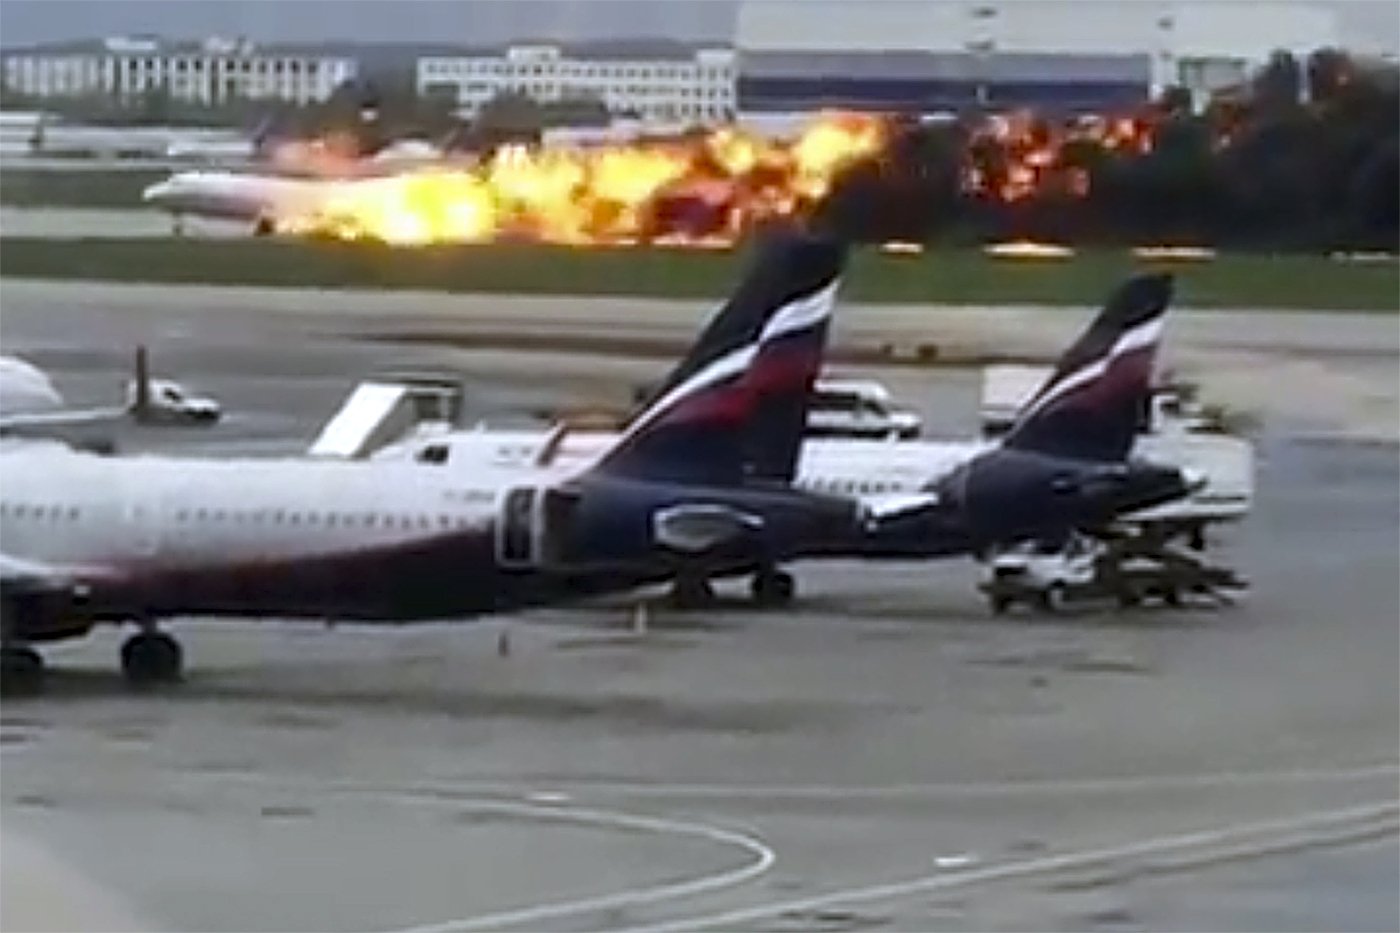 Kristian Kostov, a former Russian Eurovision song contest entrant who was in the airport at the time, tweeted: "A lot of passengers just started screaming "oh shit shit shit oh no oh no fuck nooo!!!!".... "And then we saw that there is a plane on fire right in front of us... I don't know what to say". A criminal investigation is underway.